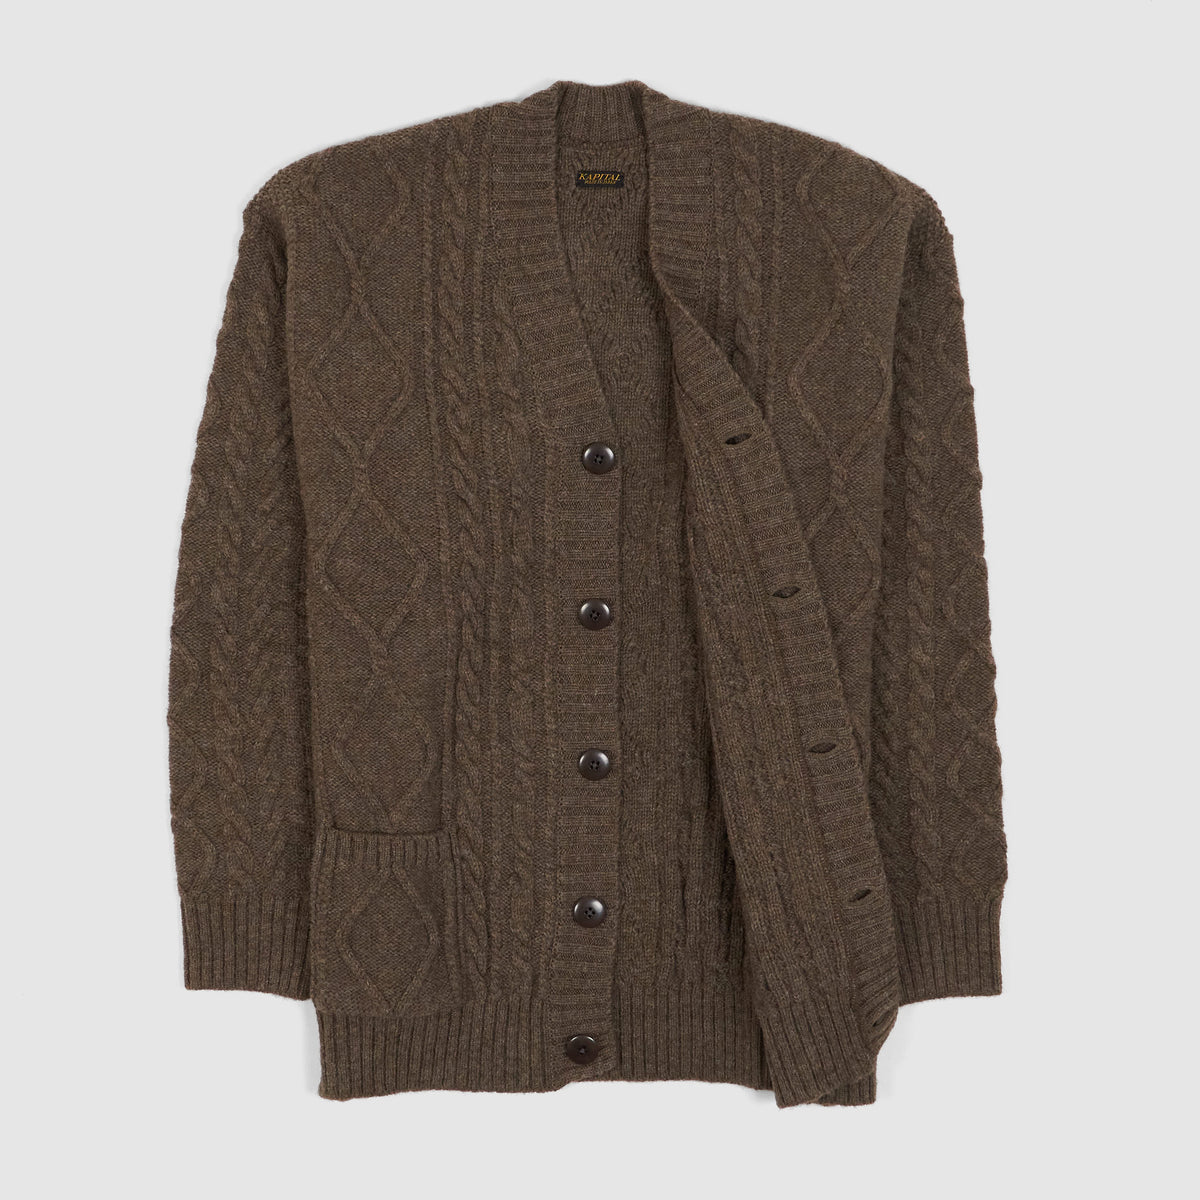 Kapital Cable Knit Smiling Elbow Cardigan